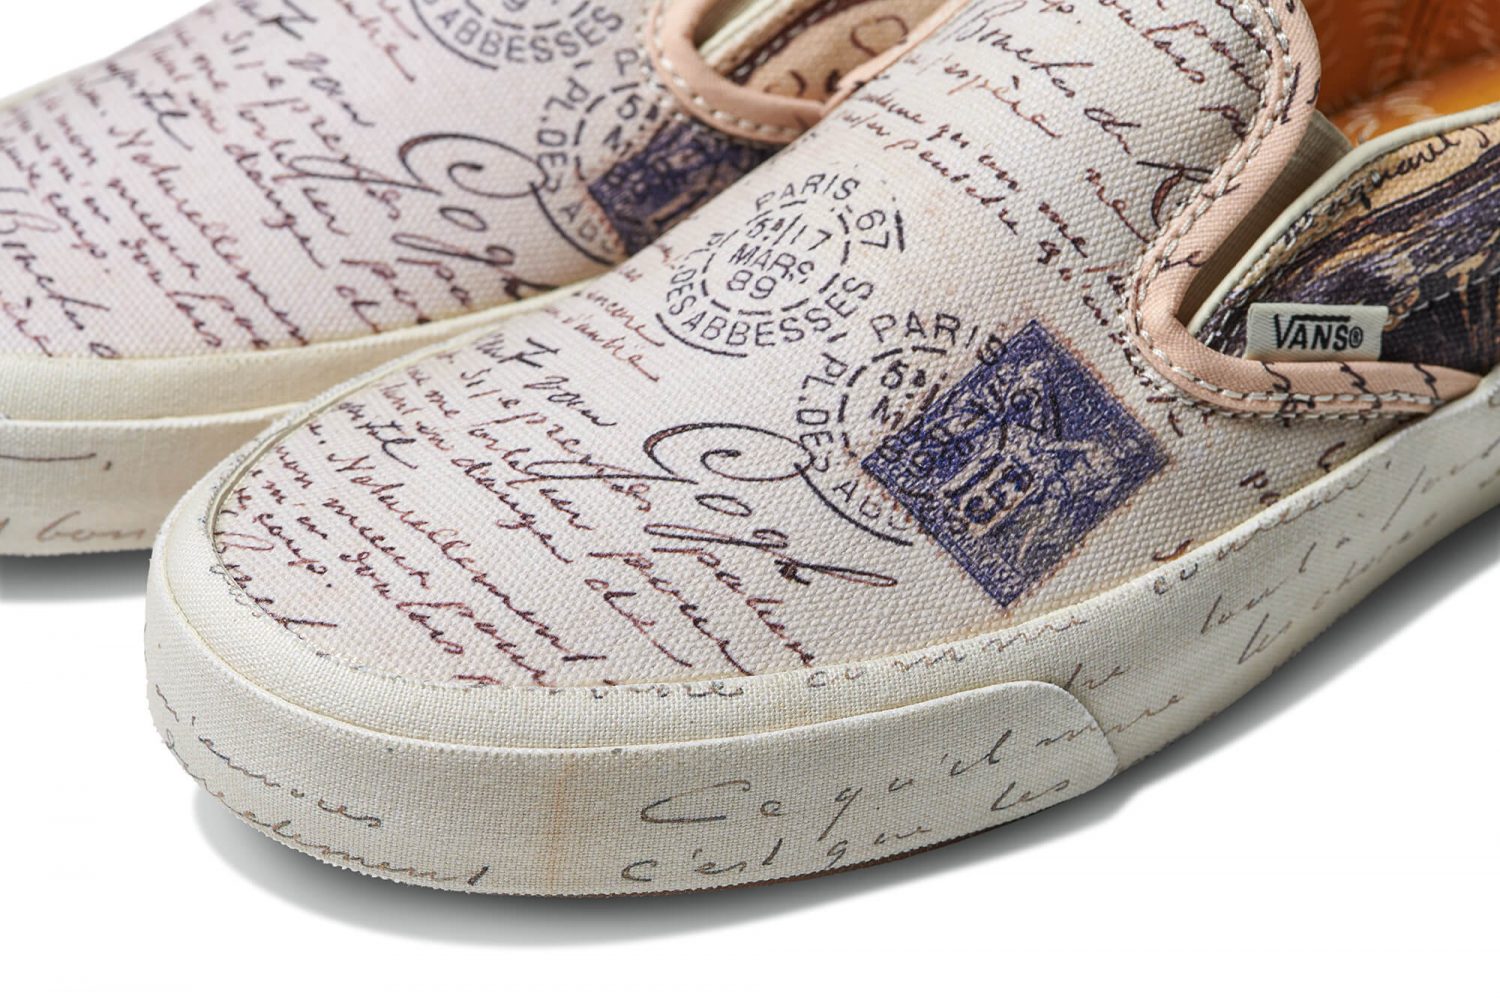 are the vans van gogh limited